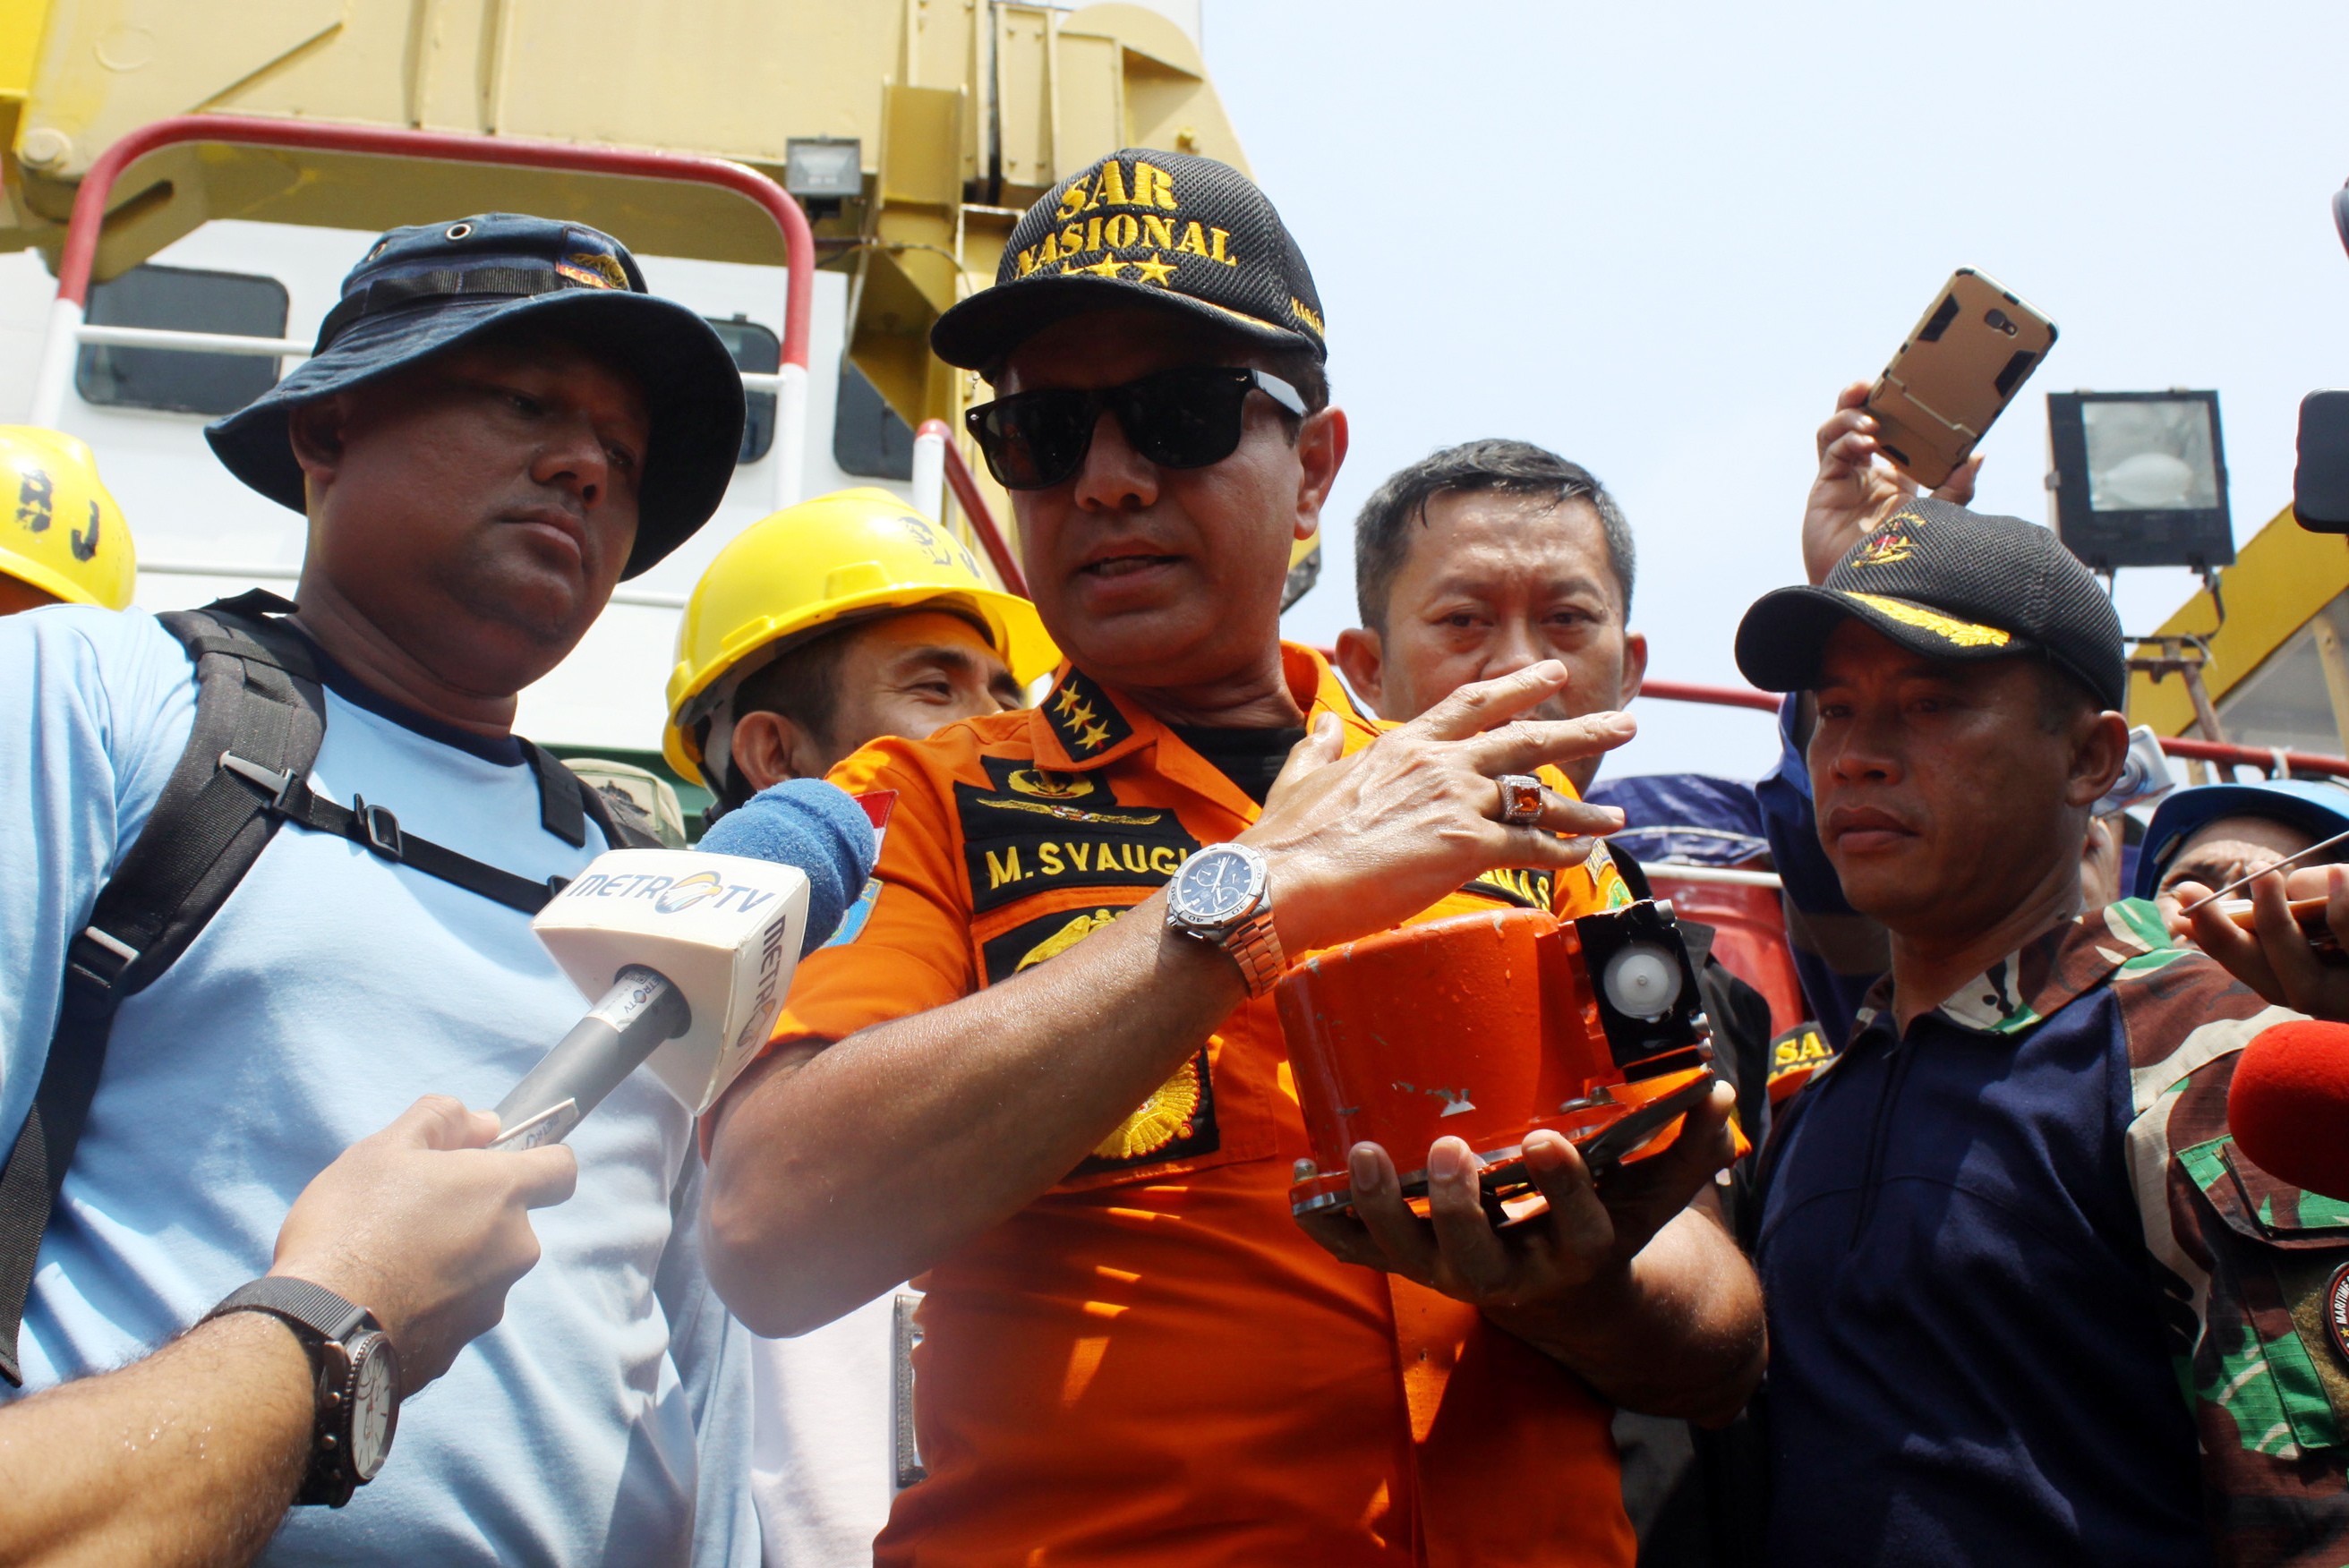 Chief of Indonesia’s National Search and Rescue Agency Muhammad Syaugi displays the core of the Lion Air JT610 flight data recorder, or black box, to journalists shortly after it was found on Thursday. The box’s external casing and electronics were shattered when the plane crashed. Photo: EPA